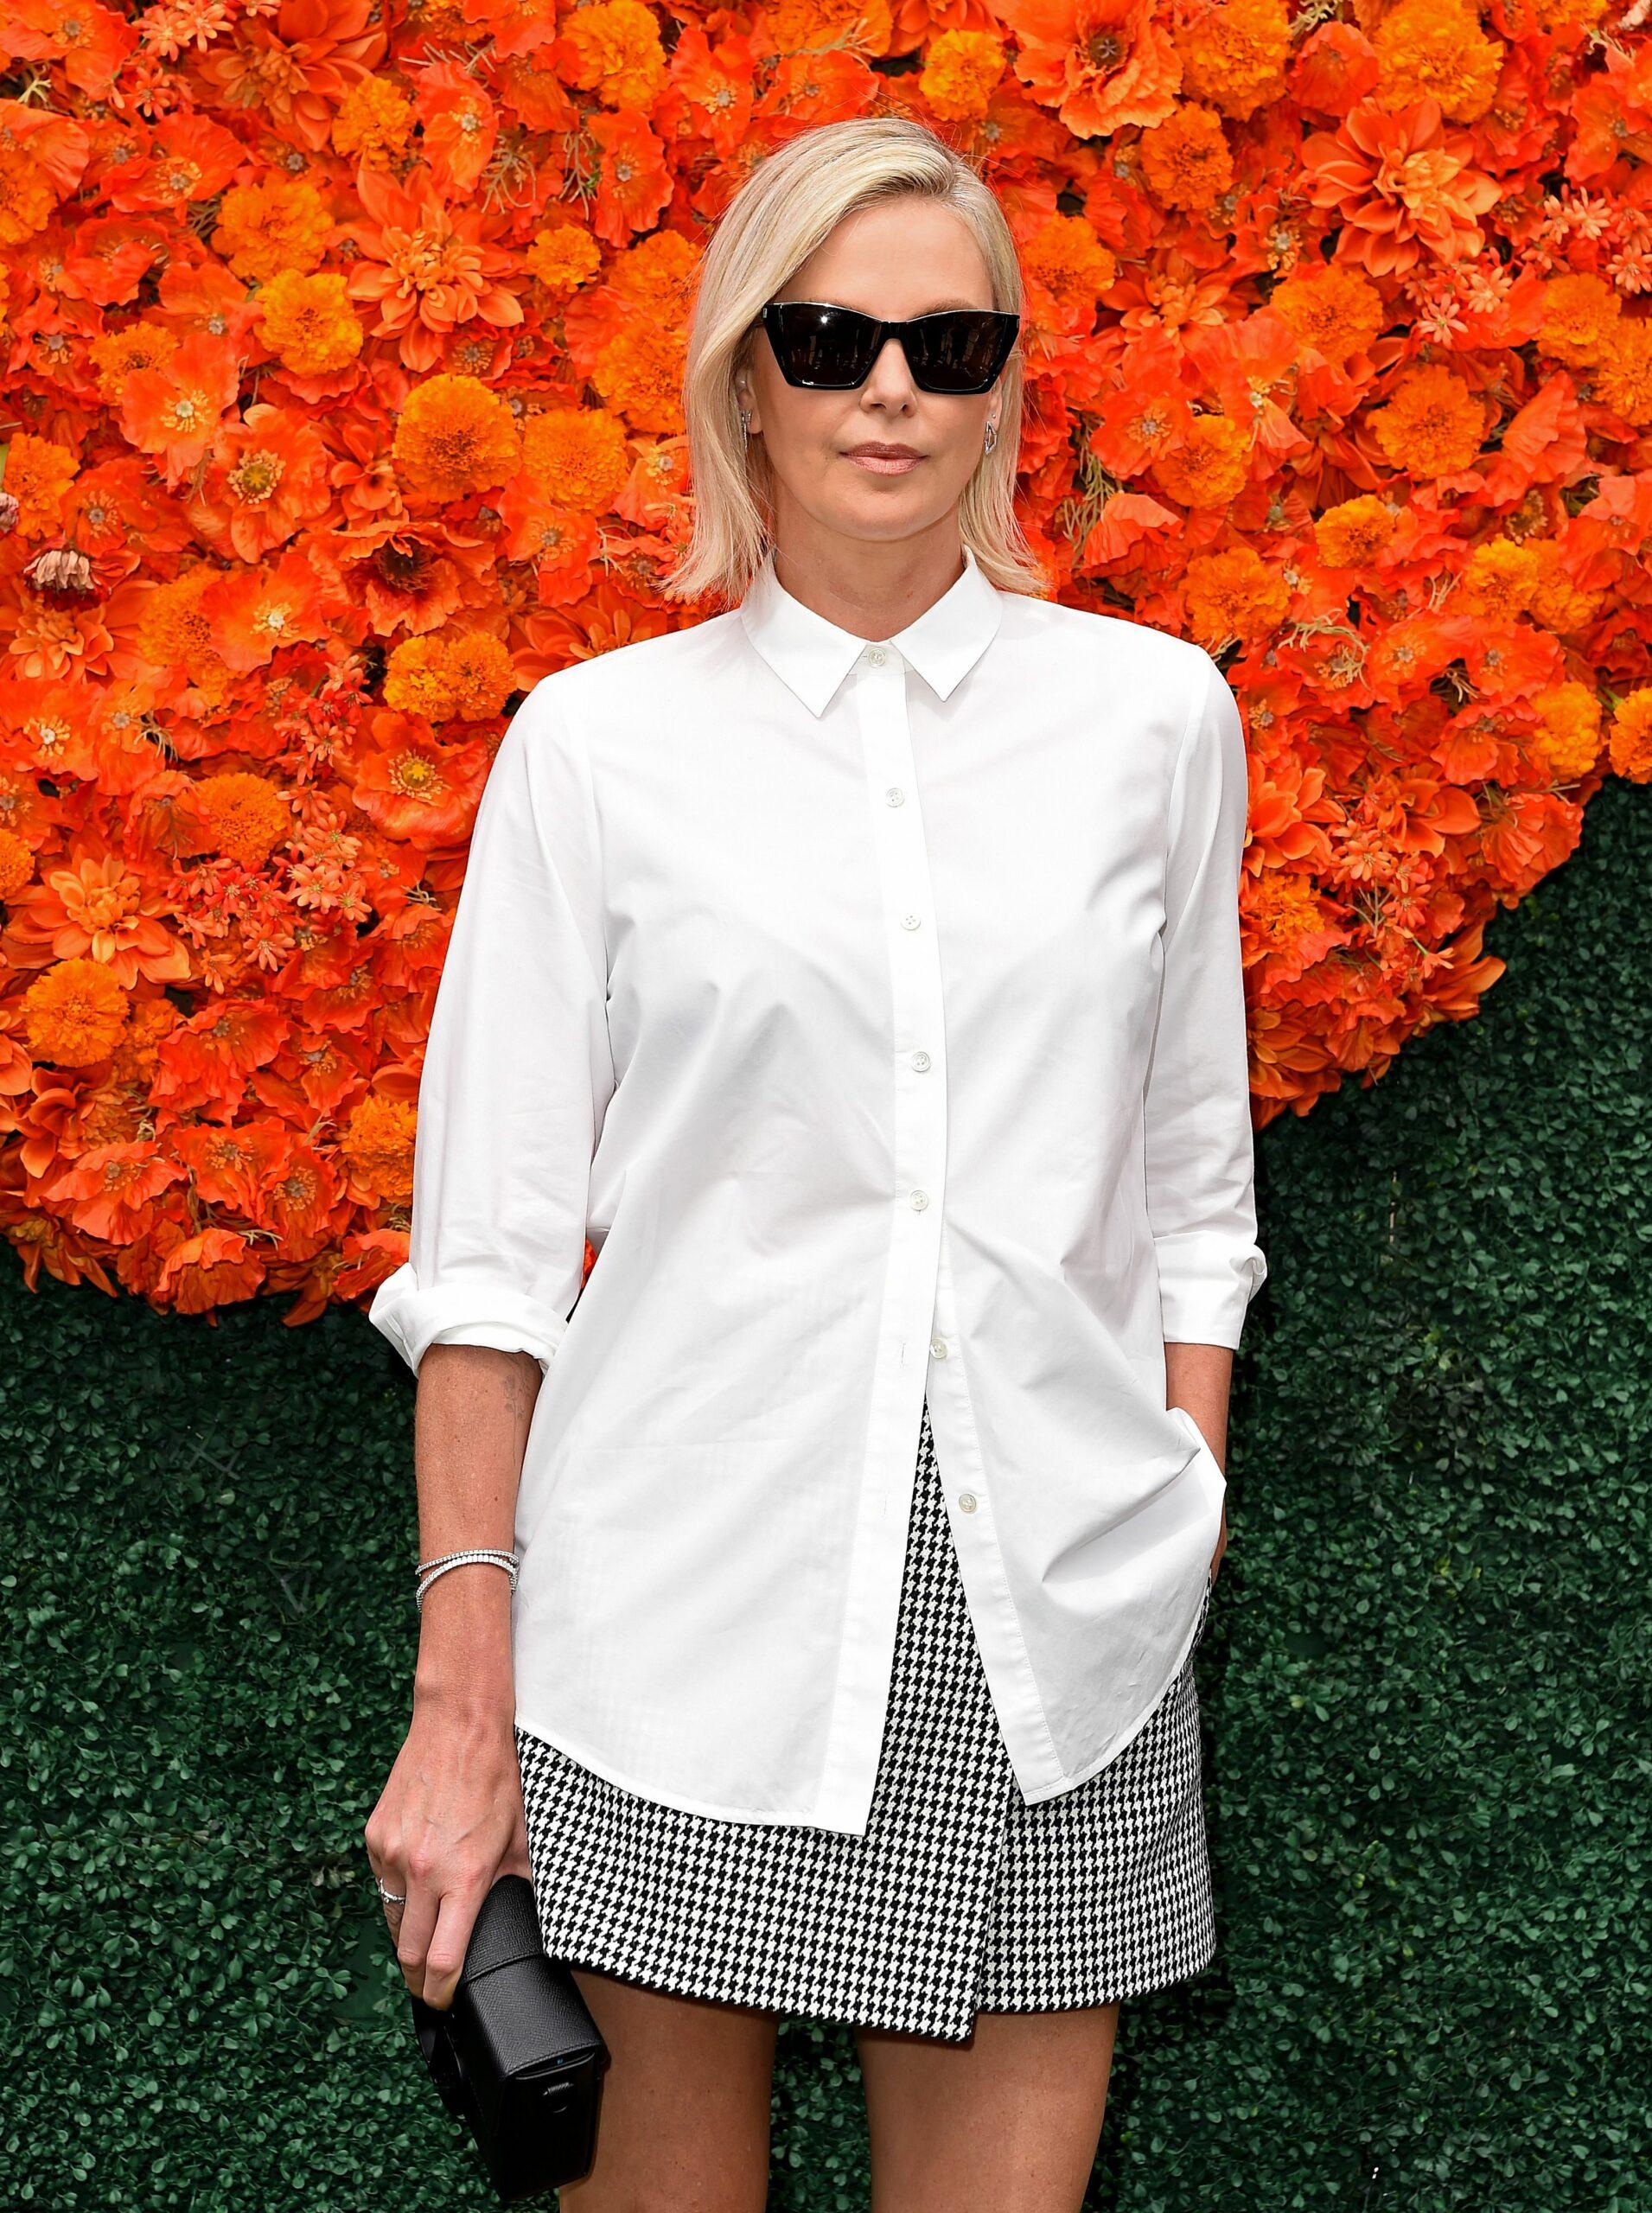 Charlize Theron at Veuve Clicquot Polo Classic